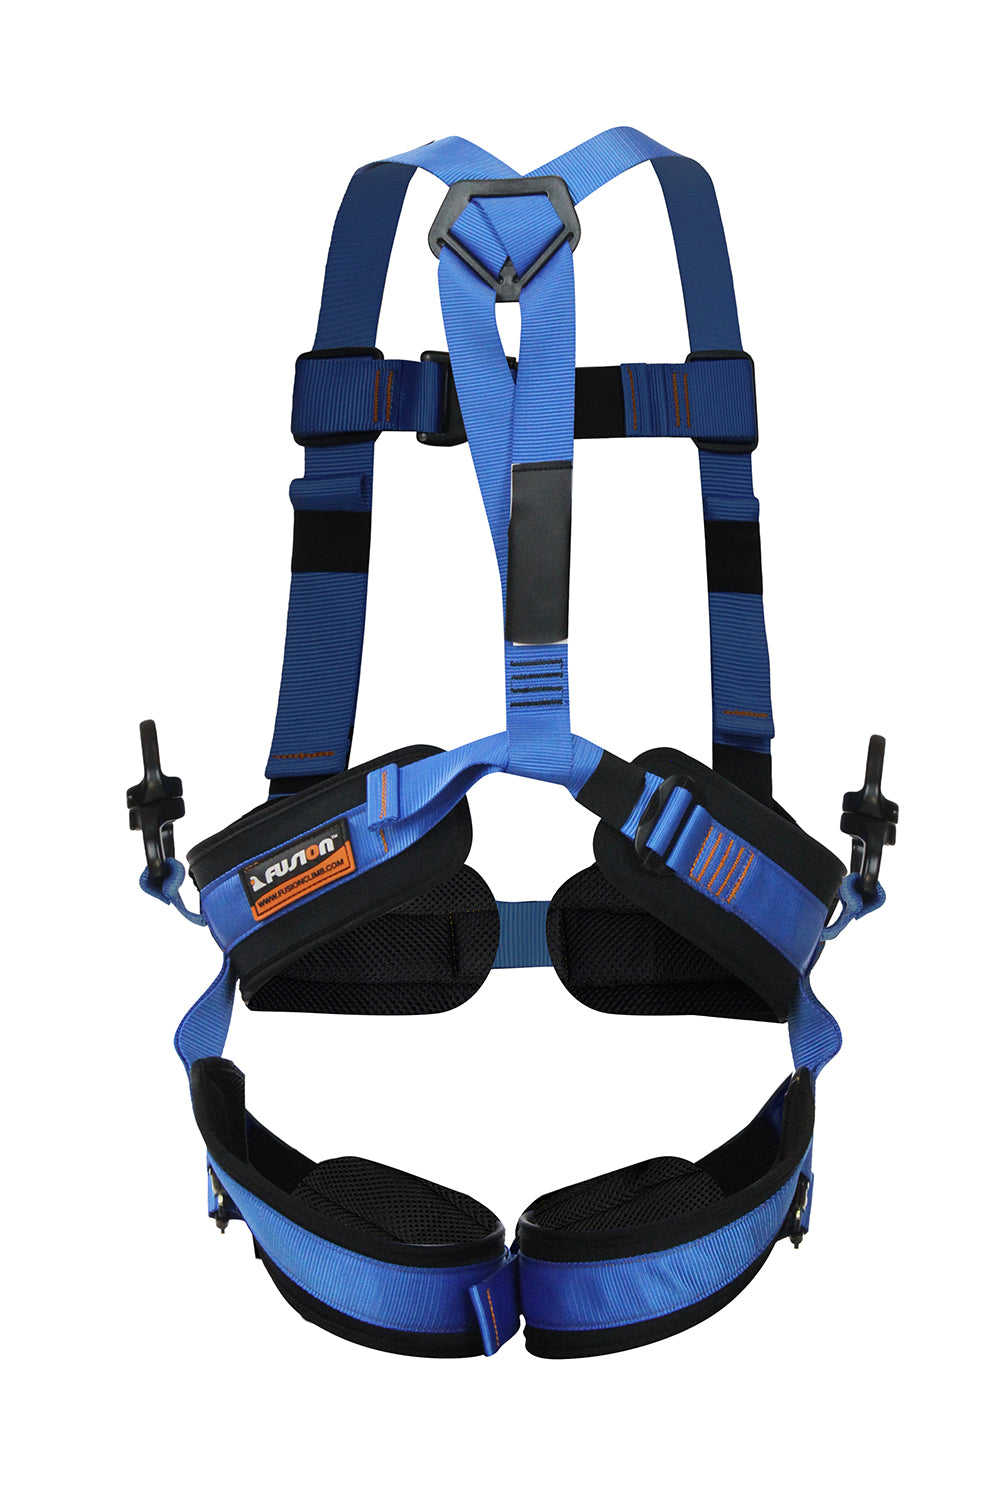 Full Body Harness for Flying – Harpy Harness with 2 Swivel Points  